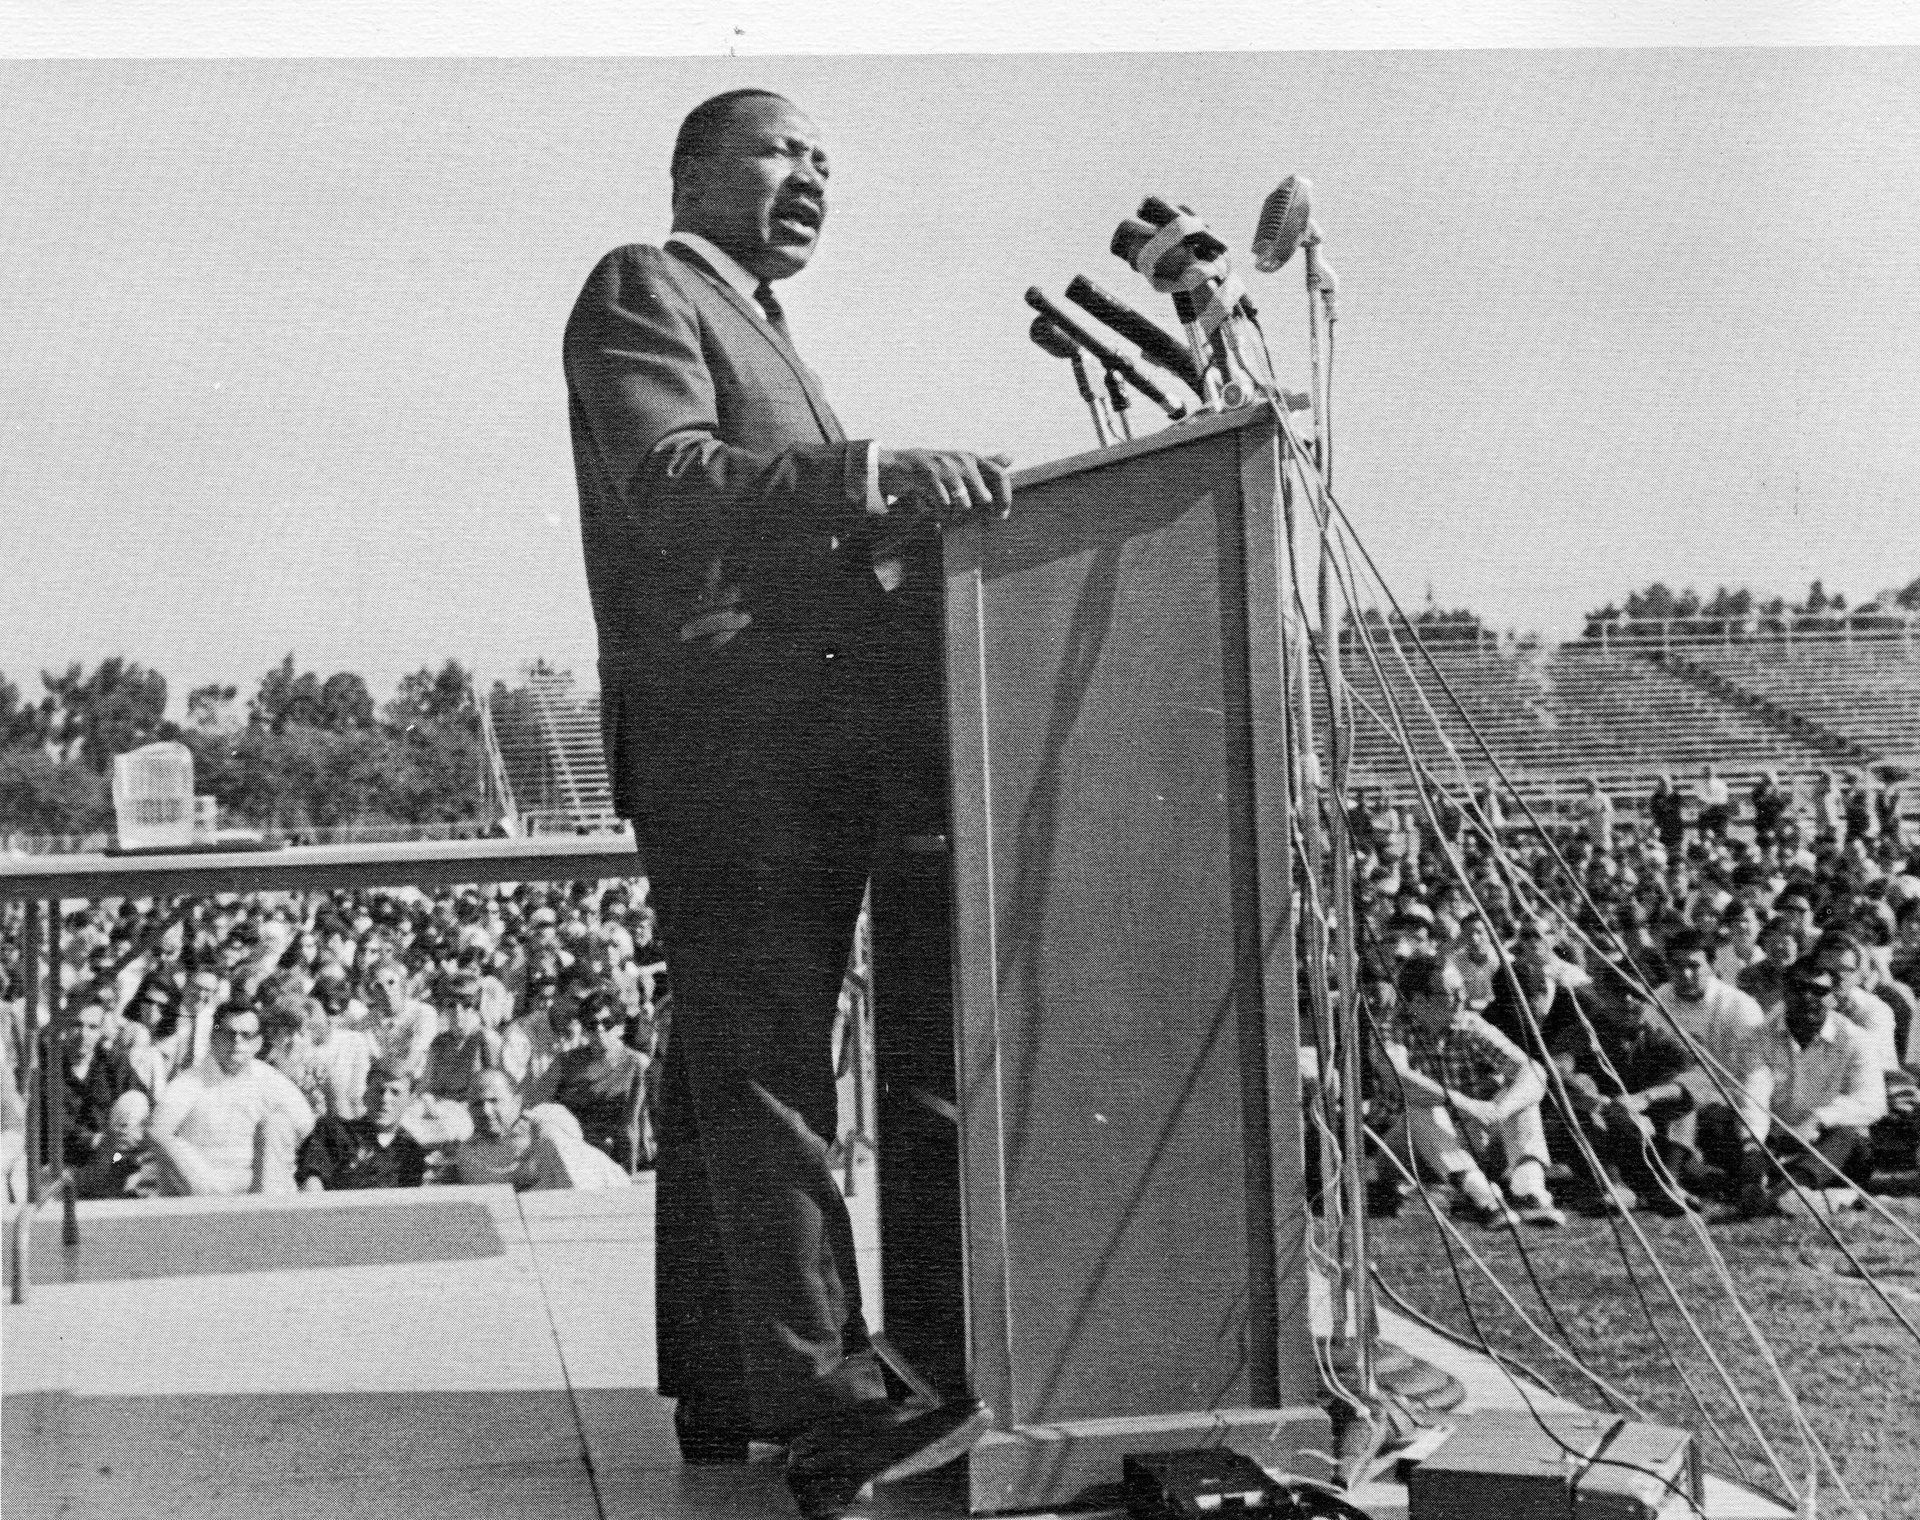 A historic photo of Martin Luther King Jr. speaking at a podium at Sac State. 